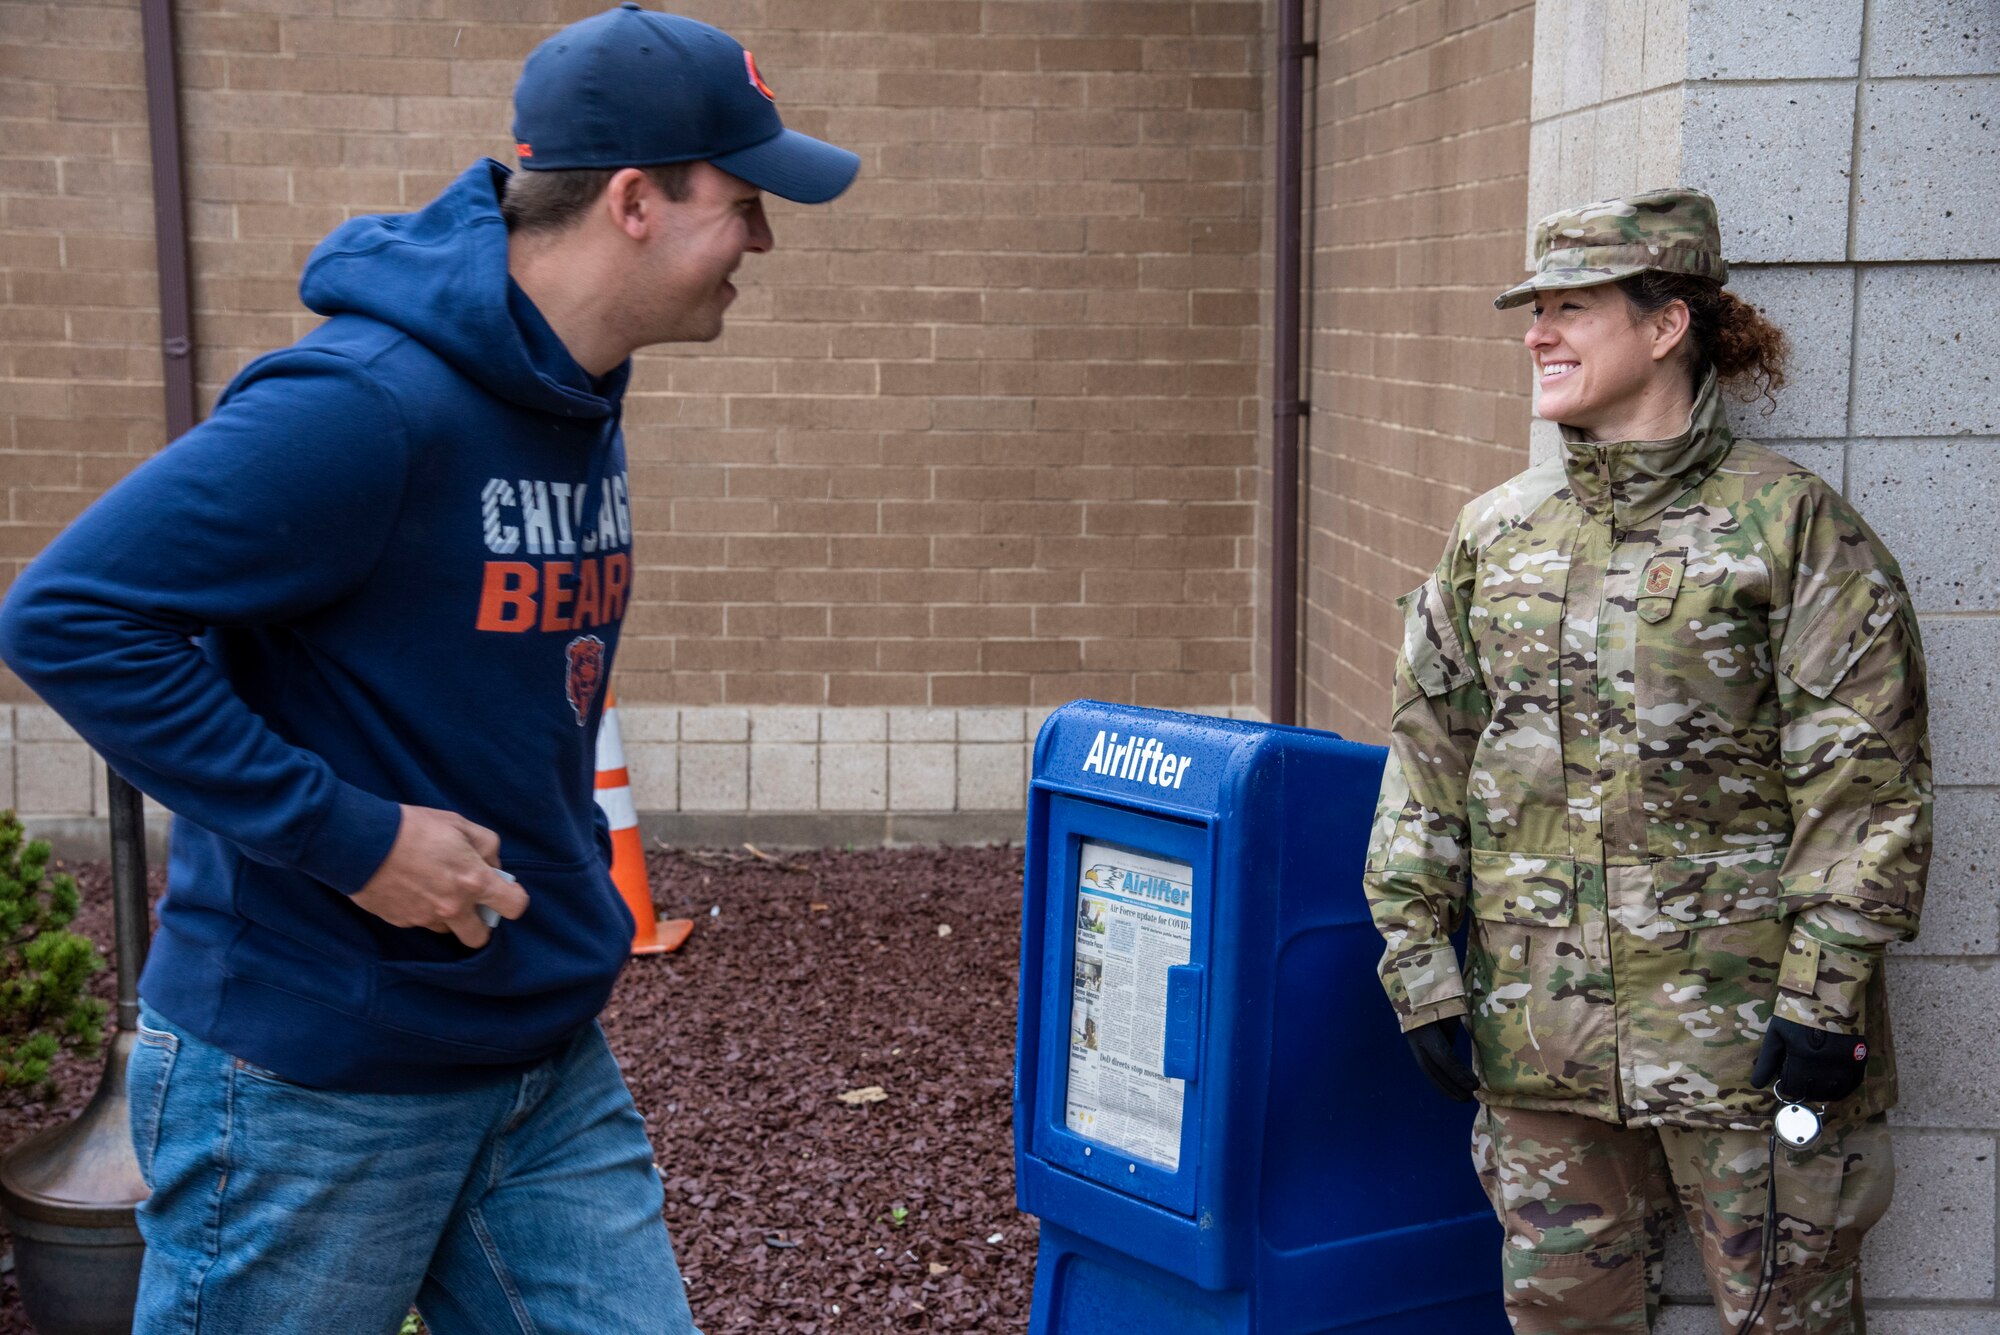 Chief Master Sgt. Shae Gee, 436th Airlift Wing command chief, greets a customer after checking an ID at the Commissary March 25, 2020, at Dover Air Force Base, Del. The Chiefs Group and First Sergeants volunteered at the Commissary checking IDs, assisting with social distancing measures, and stocking shelves to help mitigate the spread of COVID-19, reduce confusion and ensure Airmen and their families still had access to essential items. (U.S. Air Force Photo by Airman 1st Class Jonathan Harding)